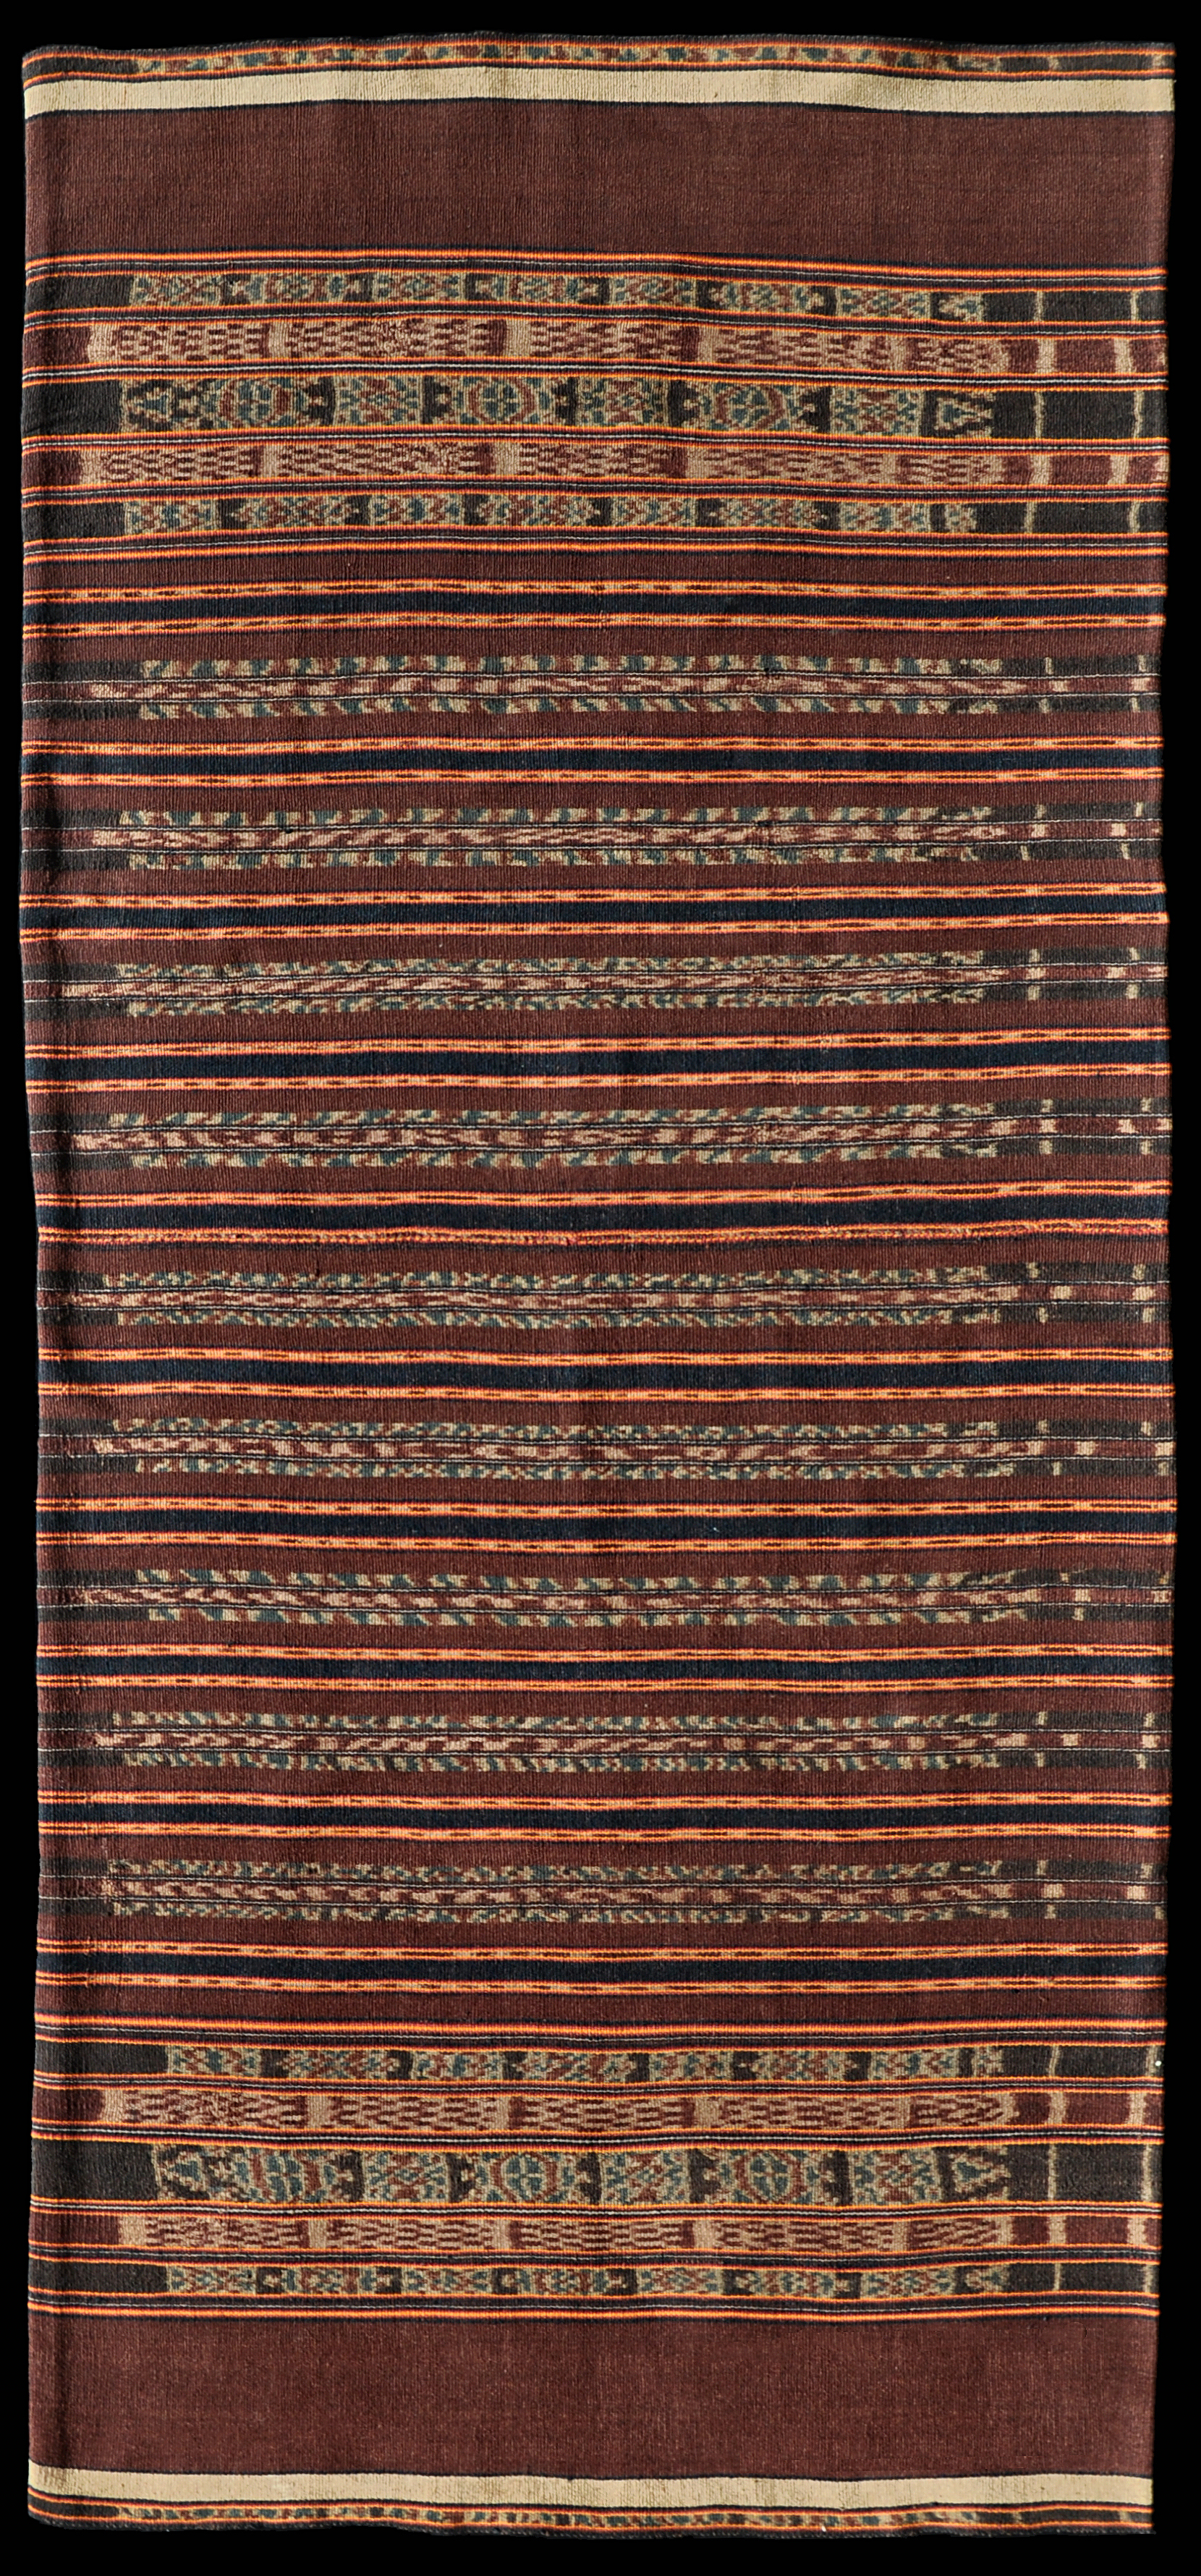 Ikat from Pantar, Solor Archipelago, Indonesia